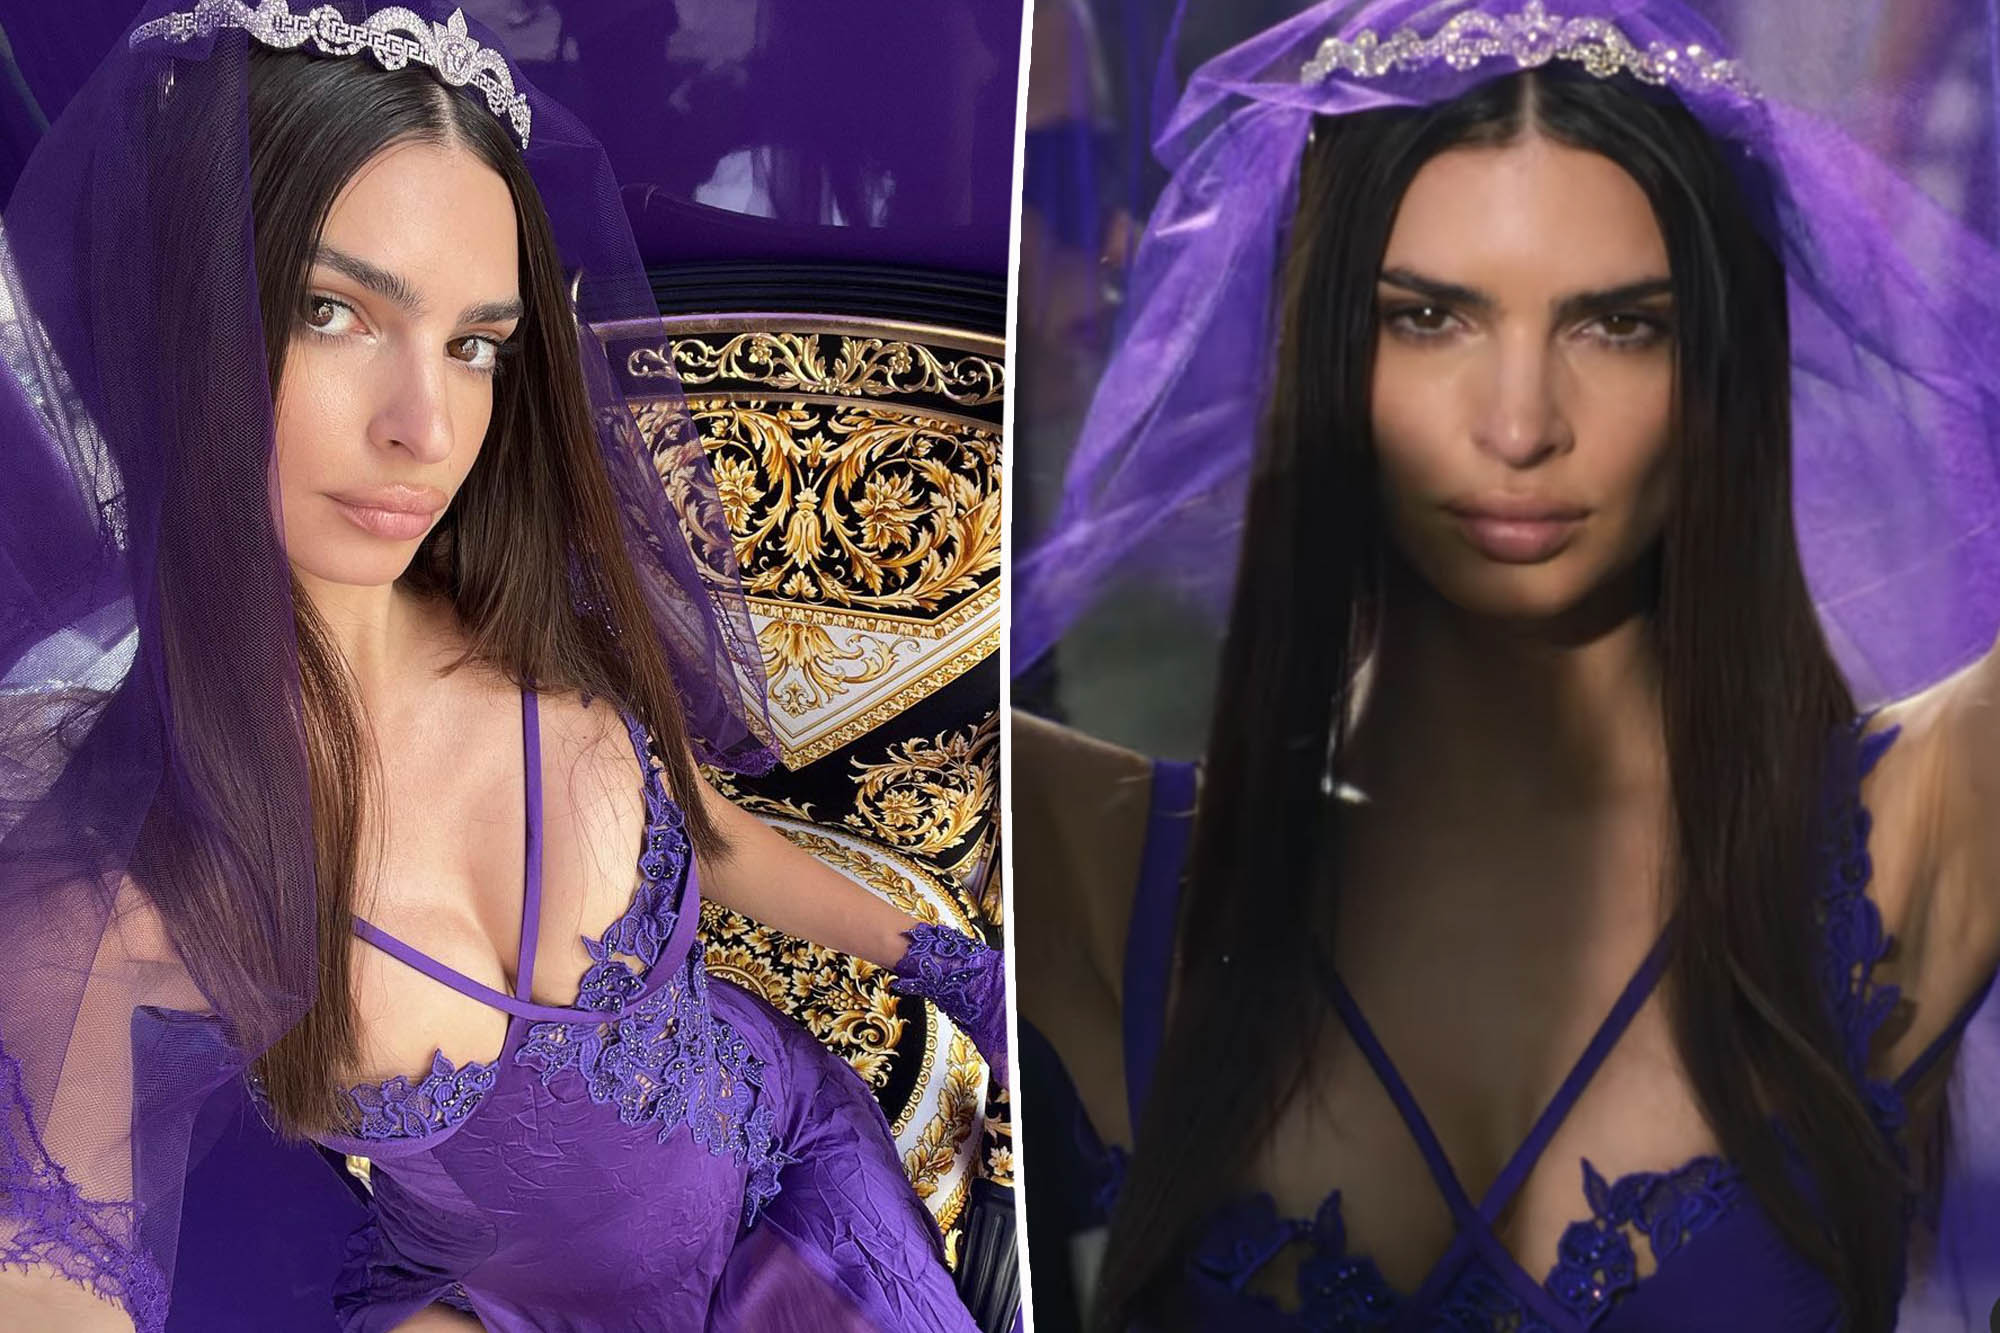 After the divorce, Emily Ratajkowski returned with a series of fashion campaigns